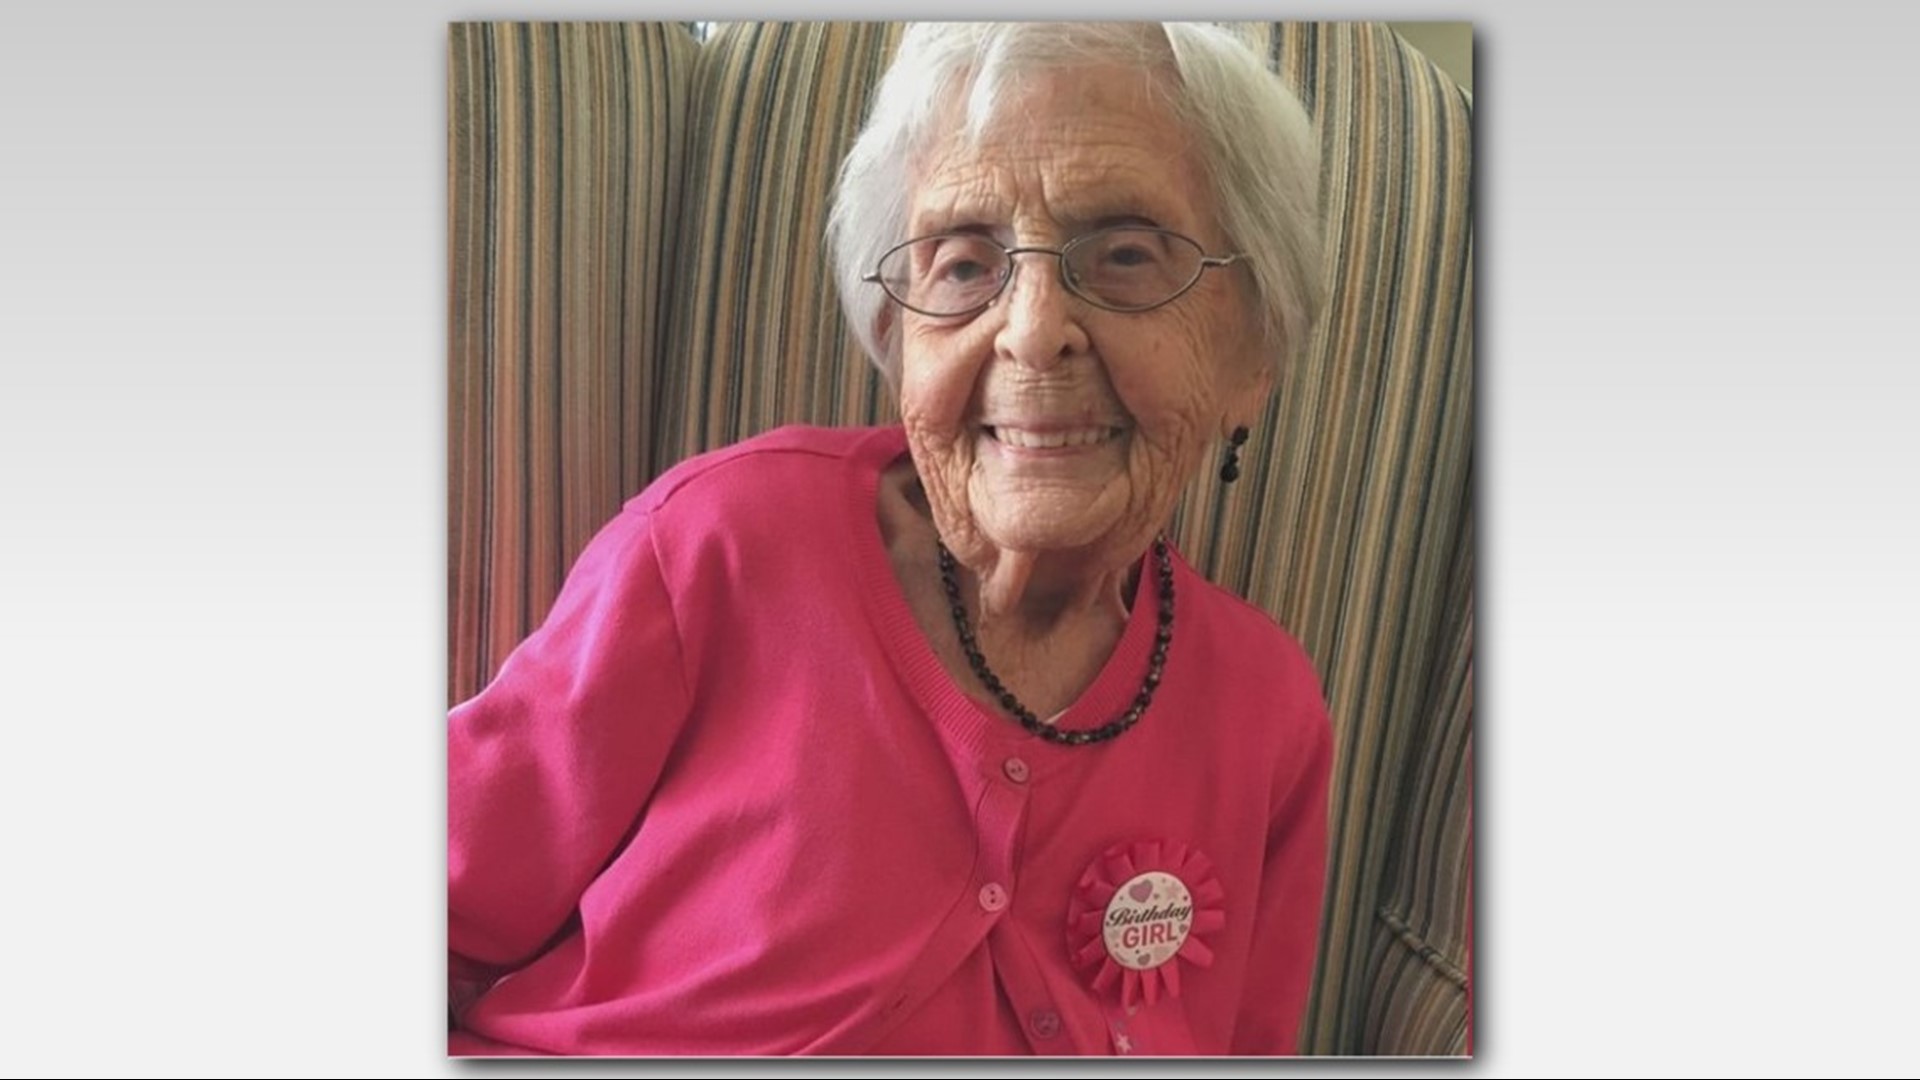 Second Oldest Person In Nc Dies At 111 Years Old